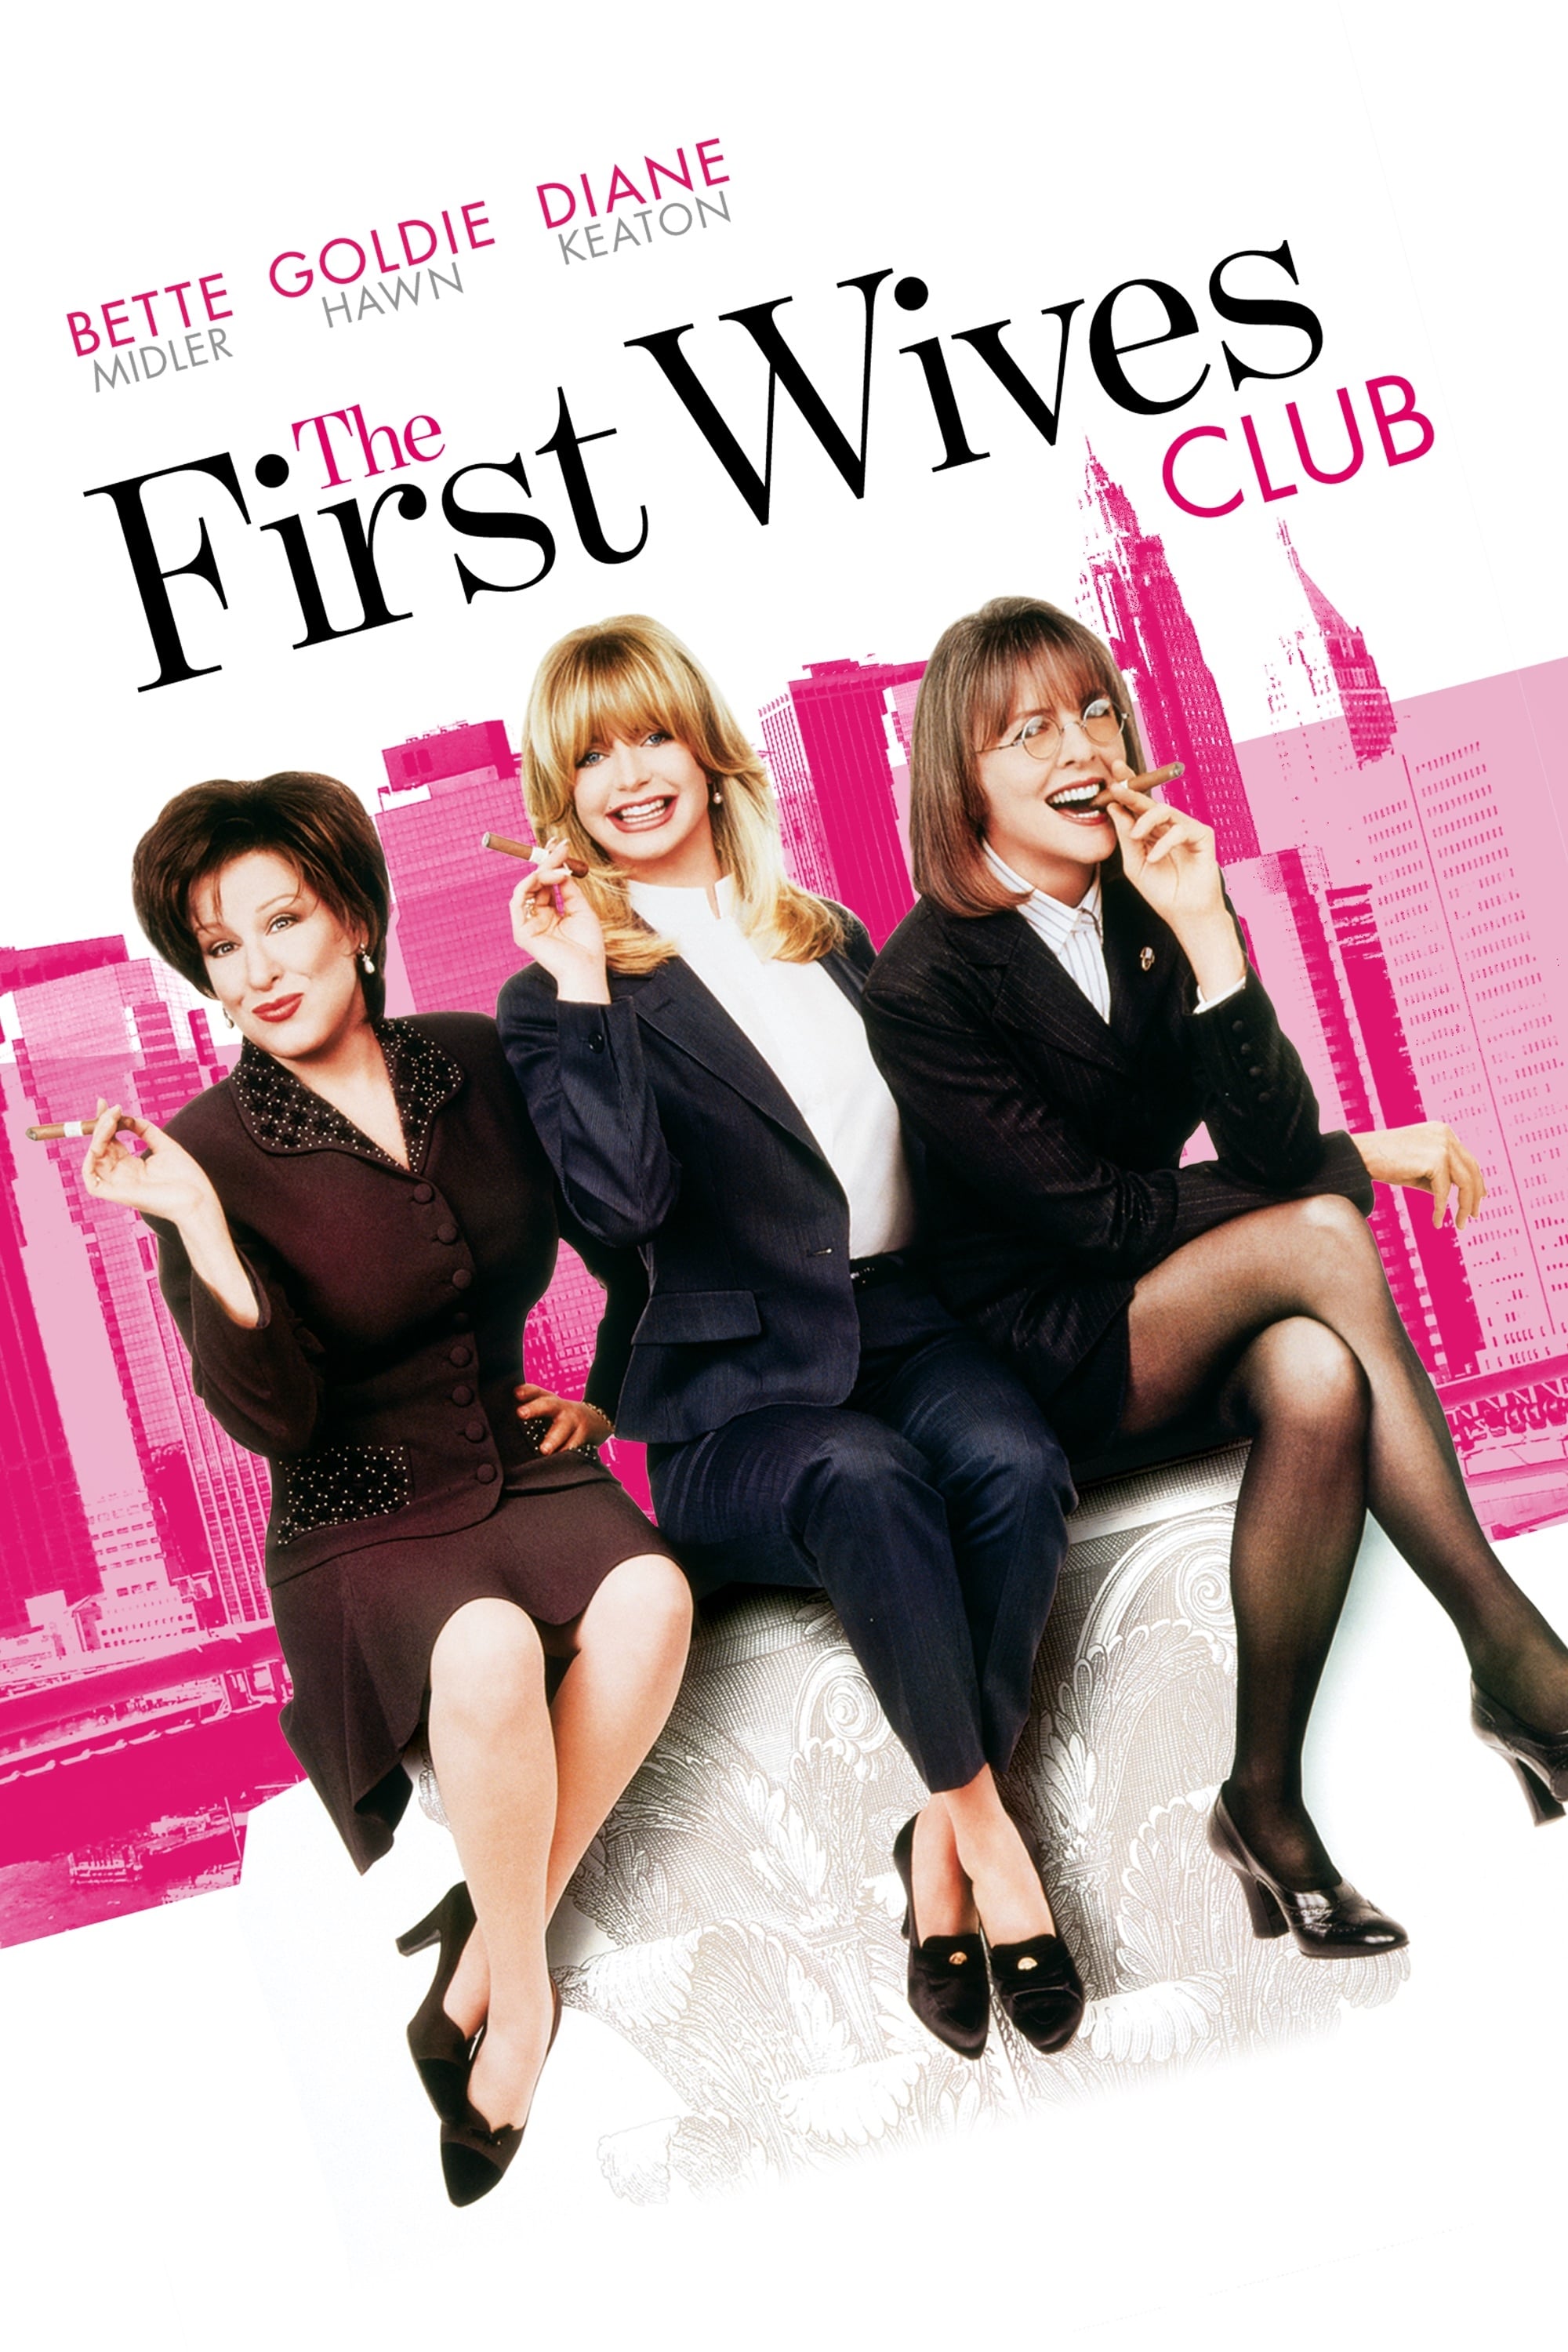 The First Wives Club POSTER